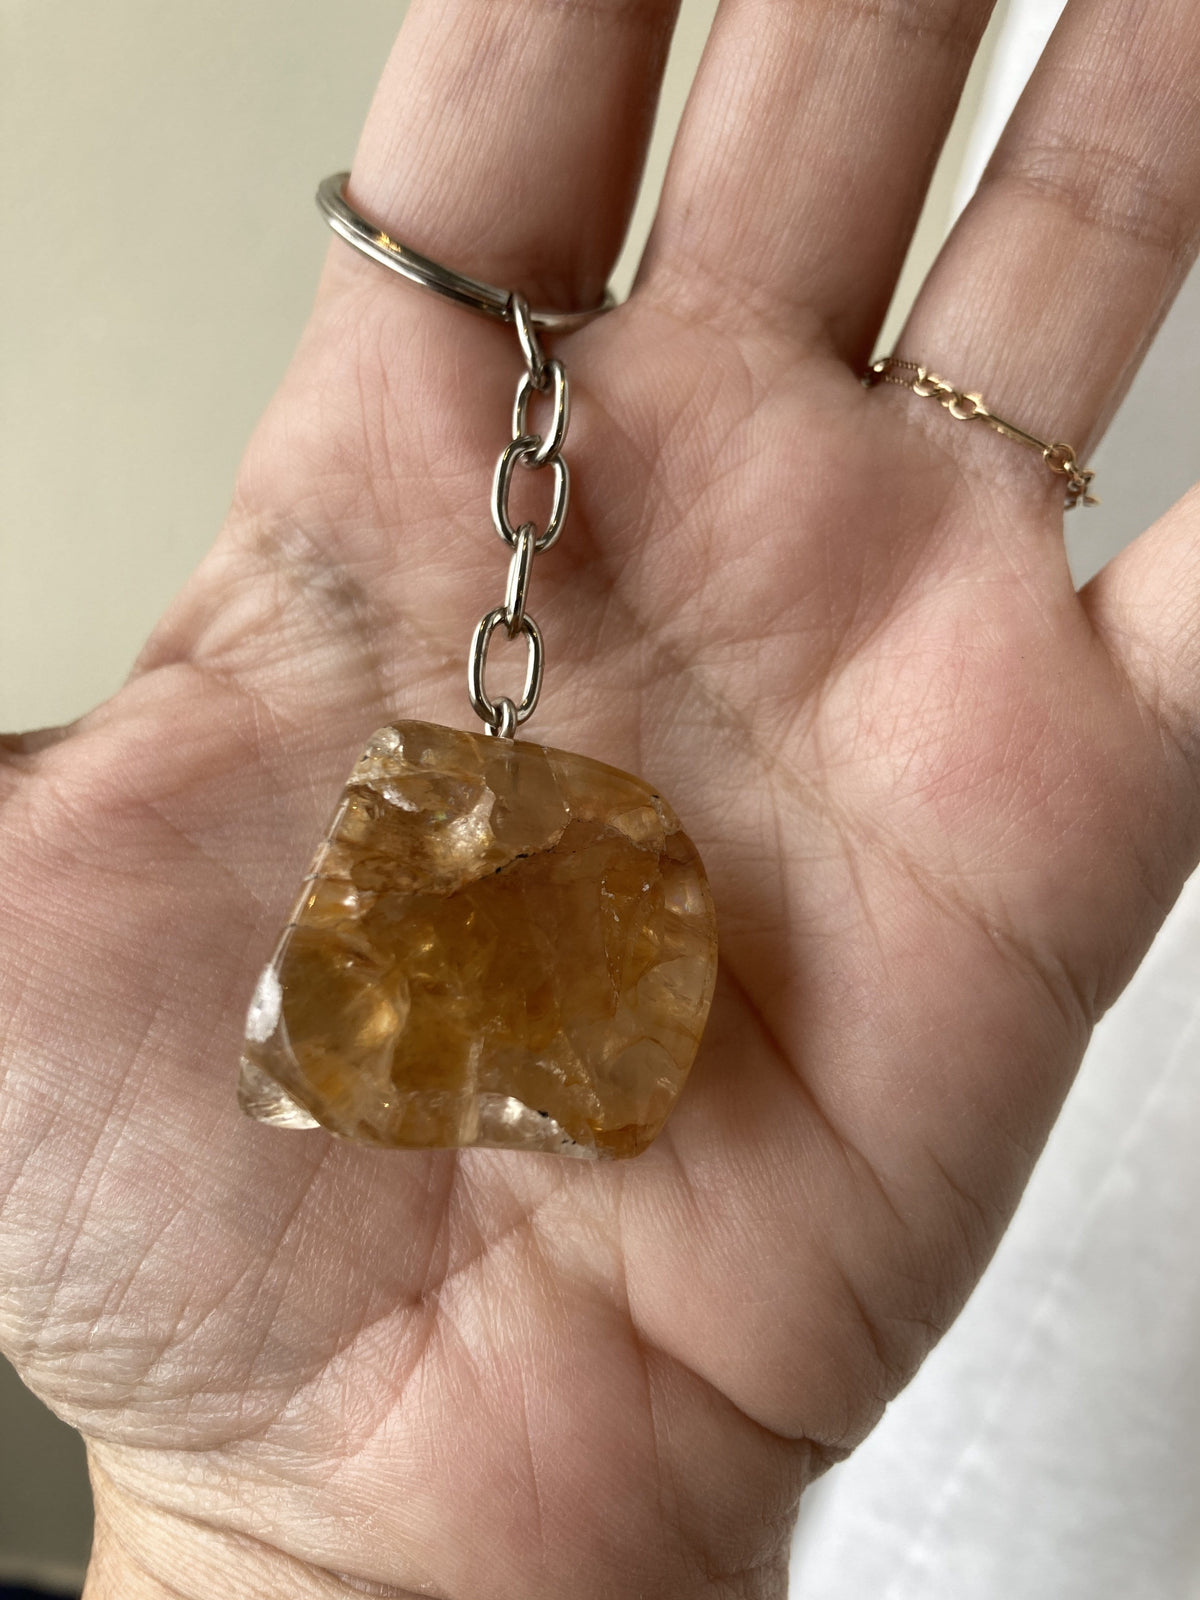 Polished Stone Crystal Keychain Dainty Accessories Natural Stone | Tumbled Stone | Worry Stone Crystal Keychains